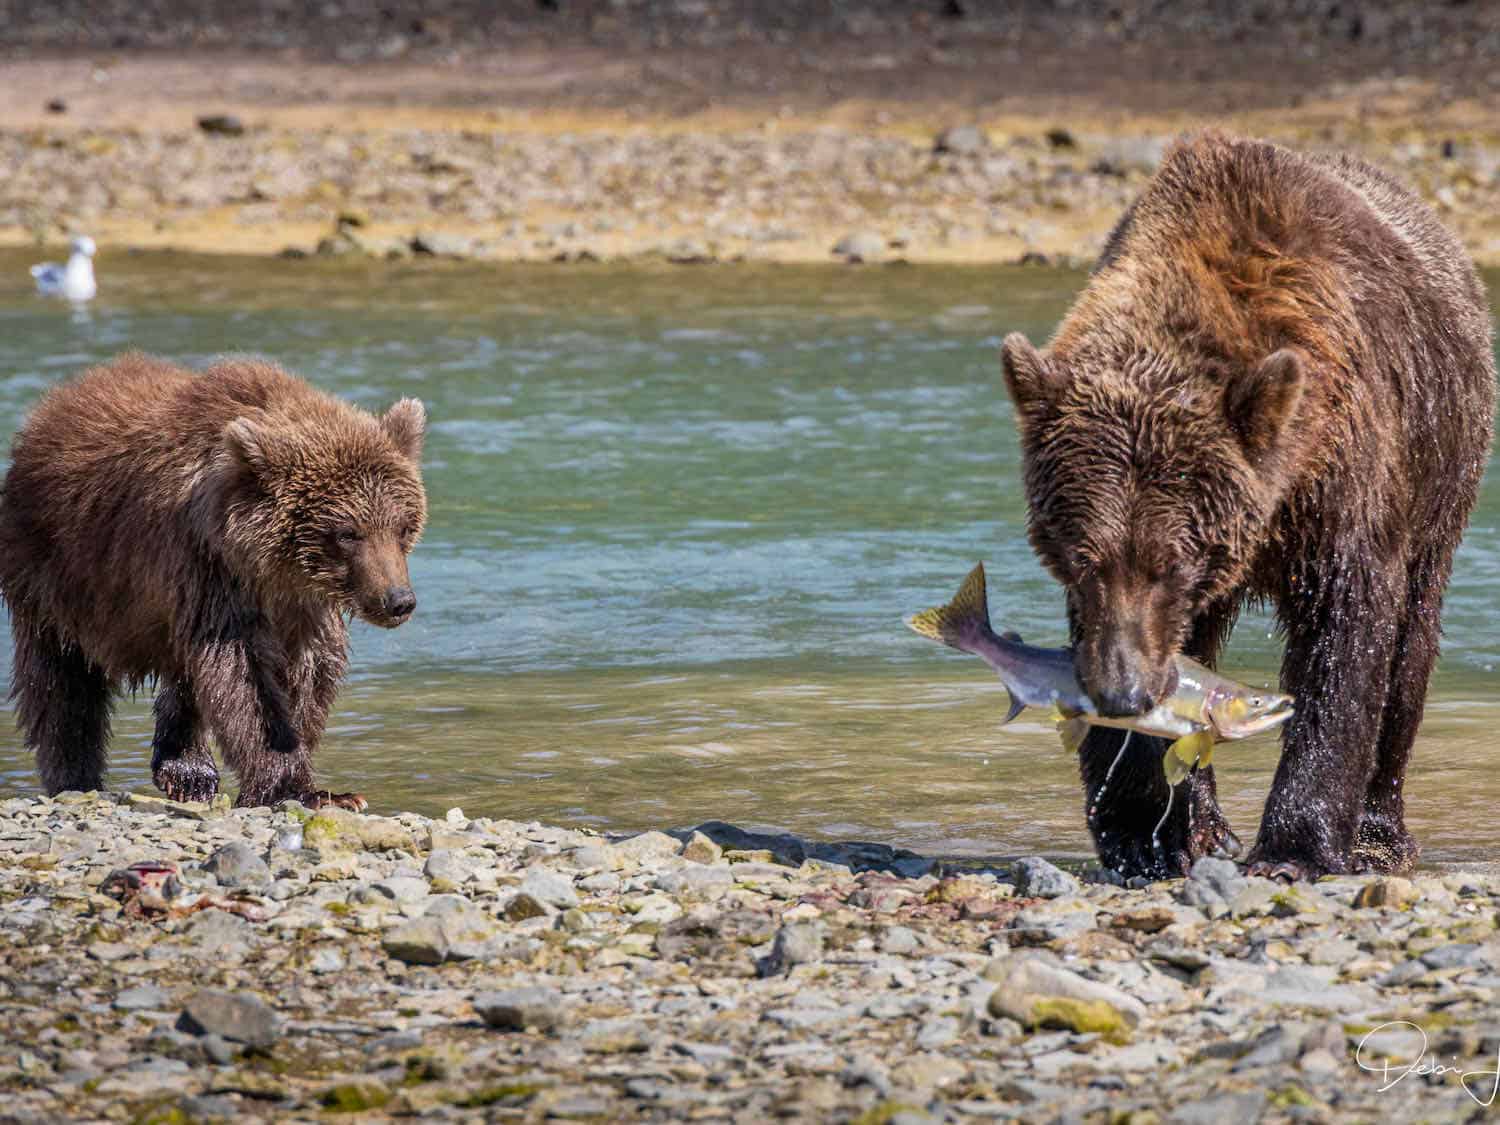 Baby bear watches a mother brown bear catching a fish in a river